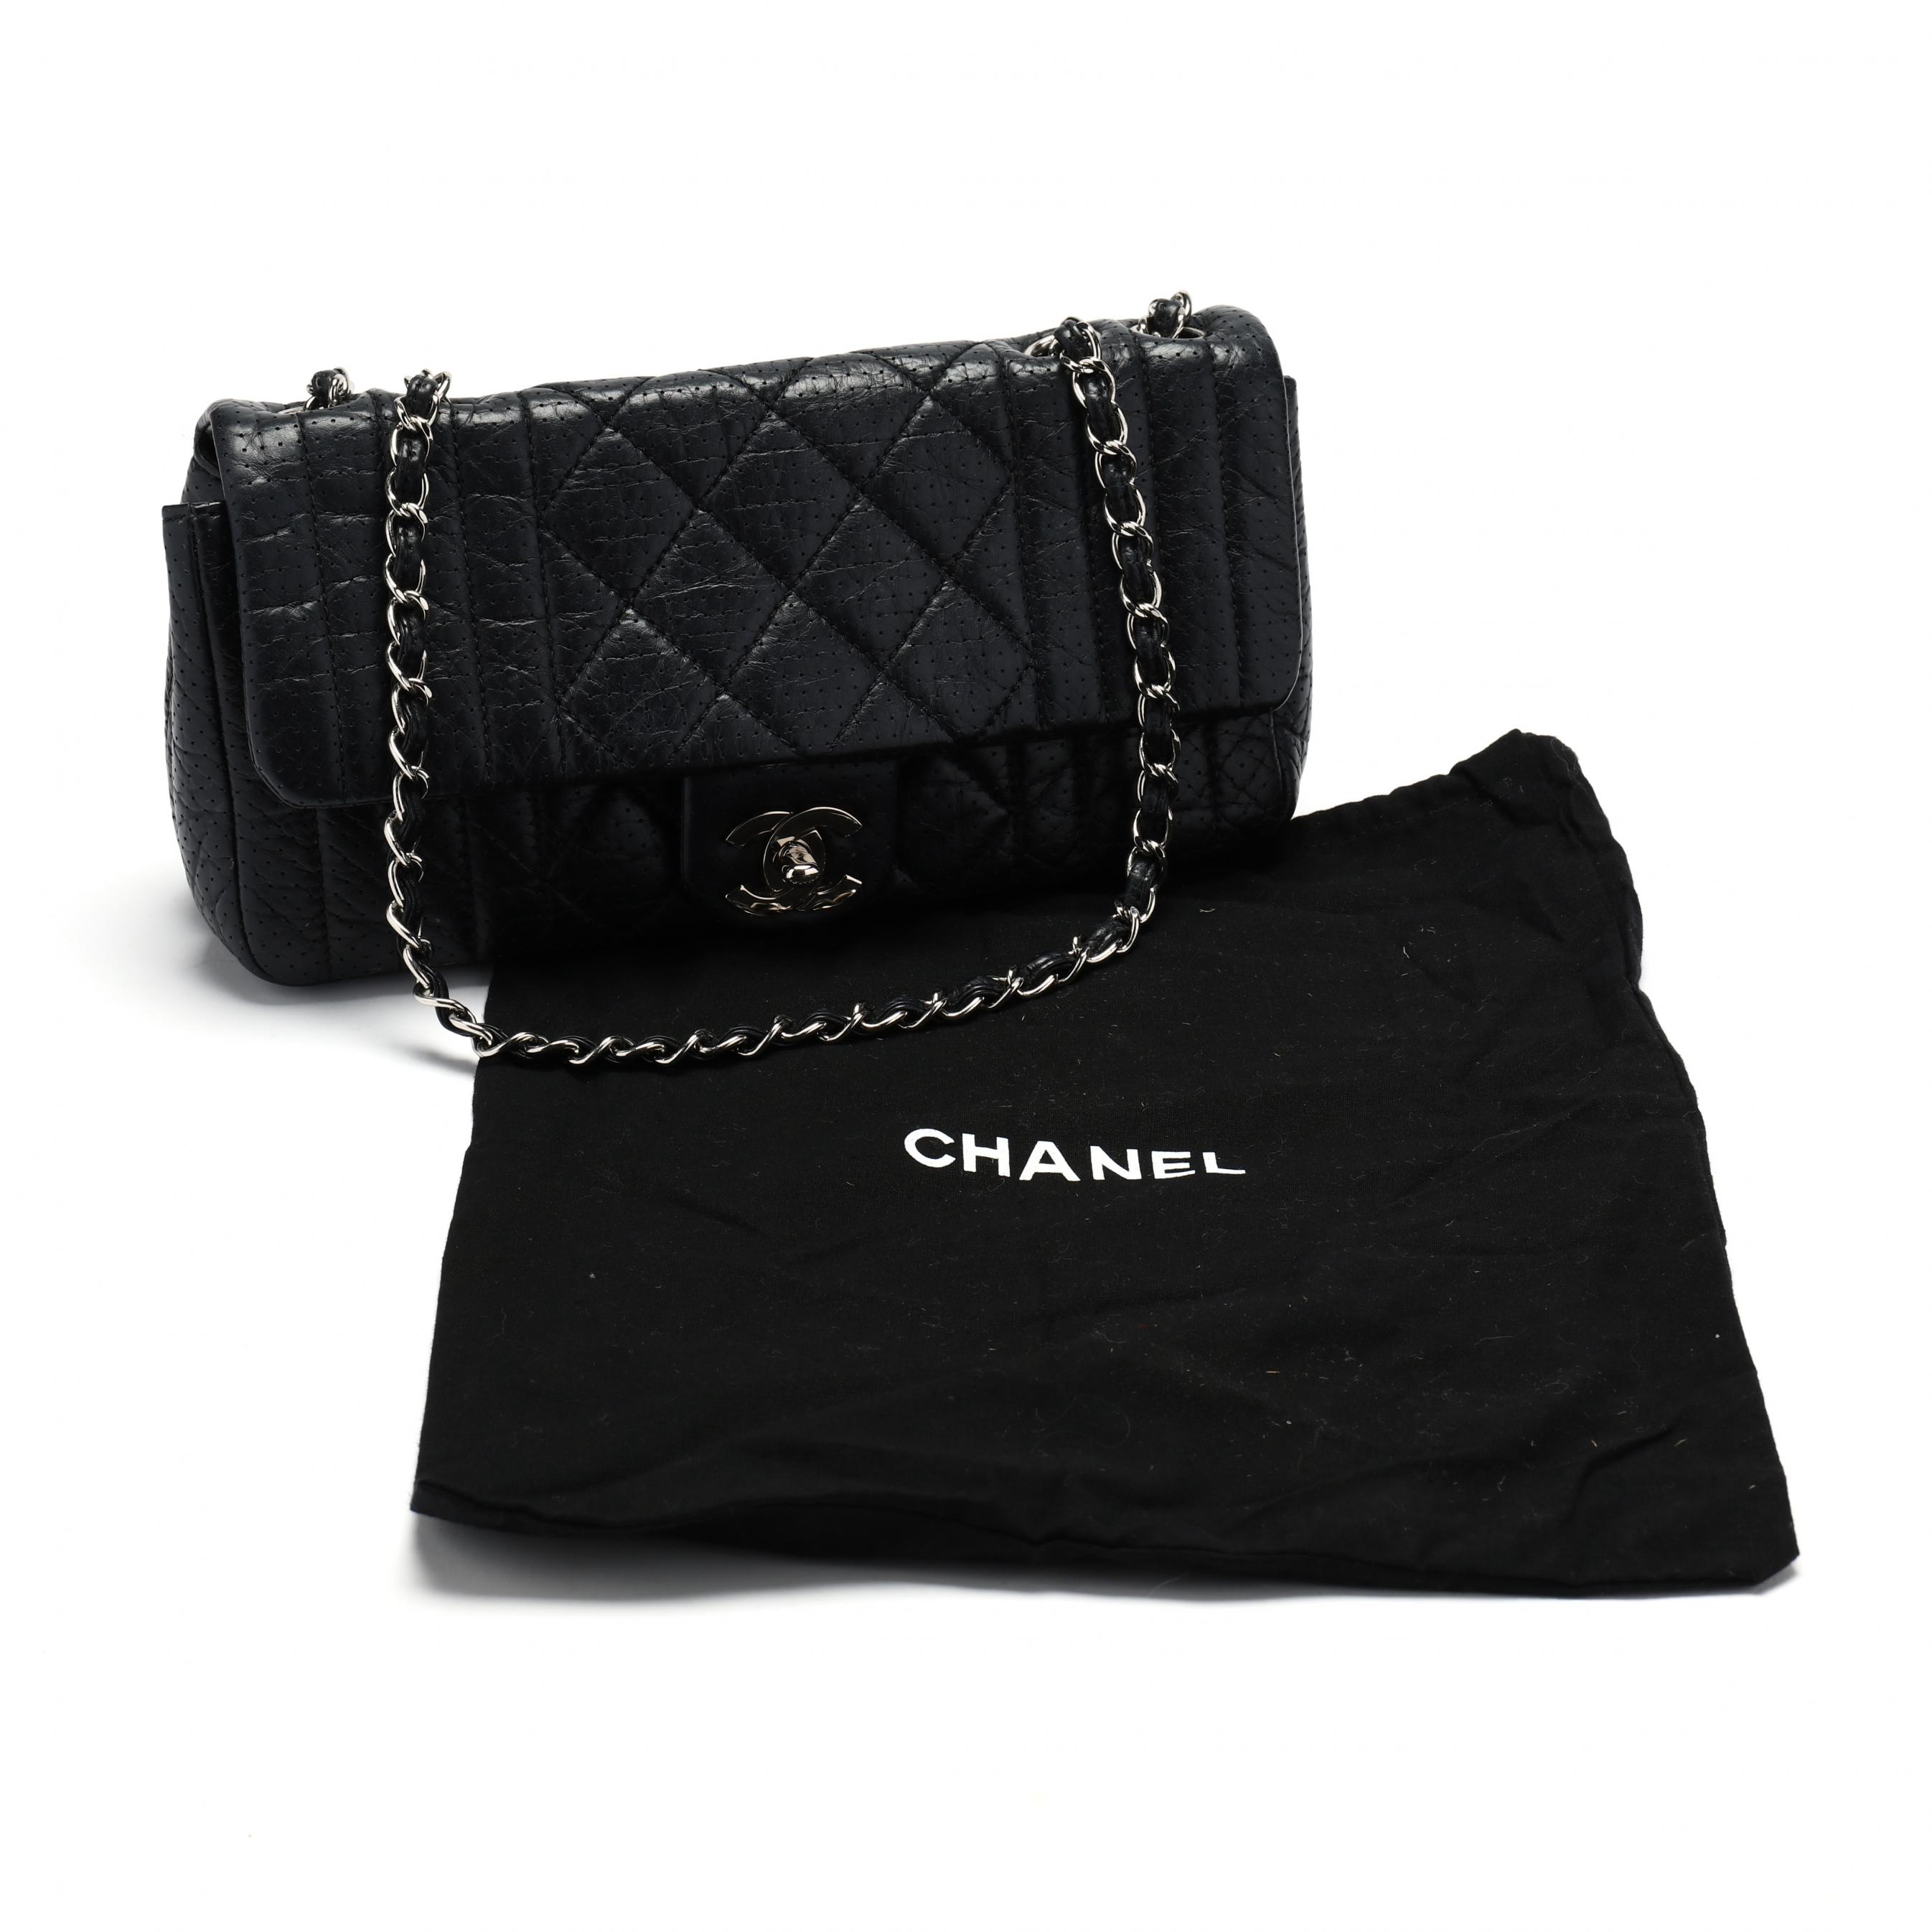 The History of the Chanel Classic Flap Bag - Invaluable